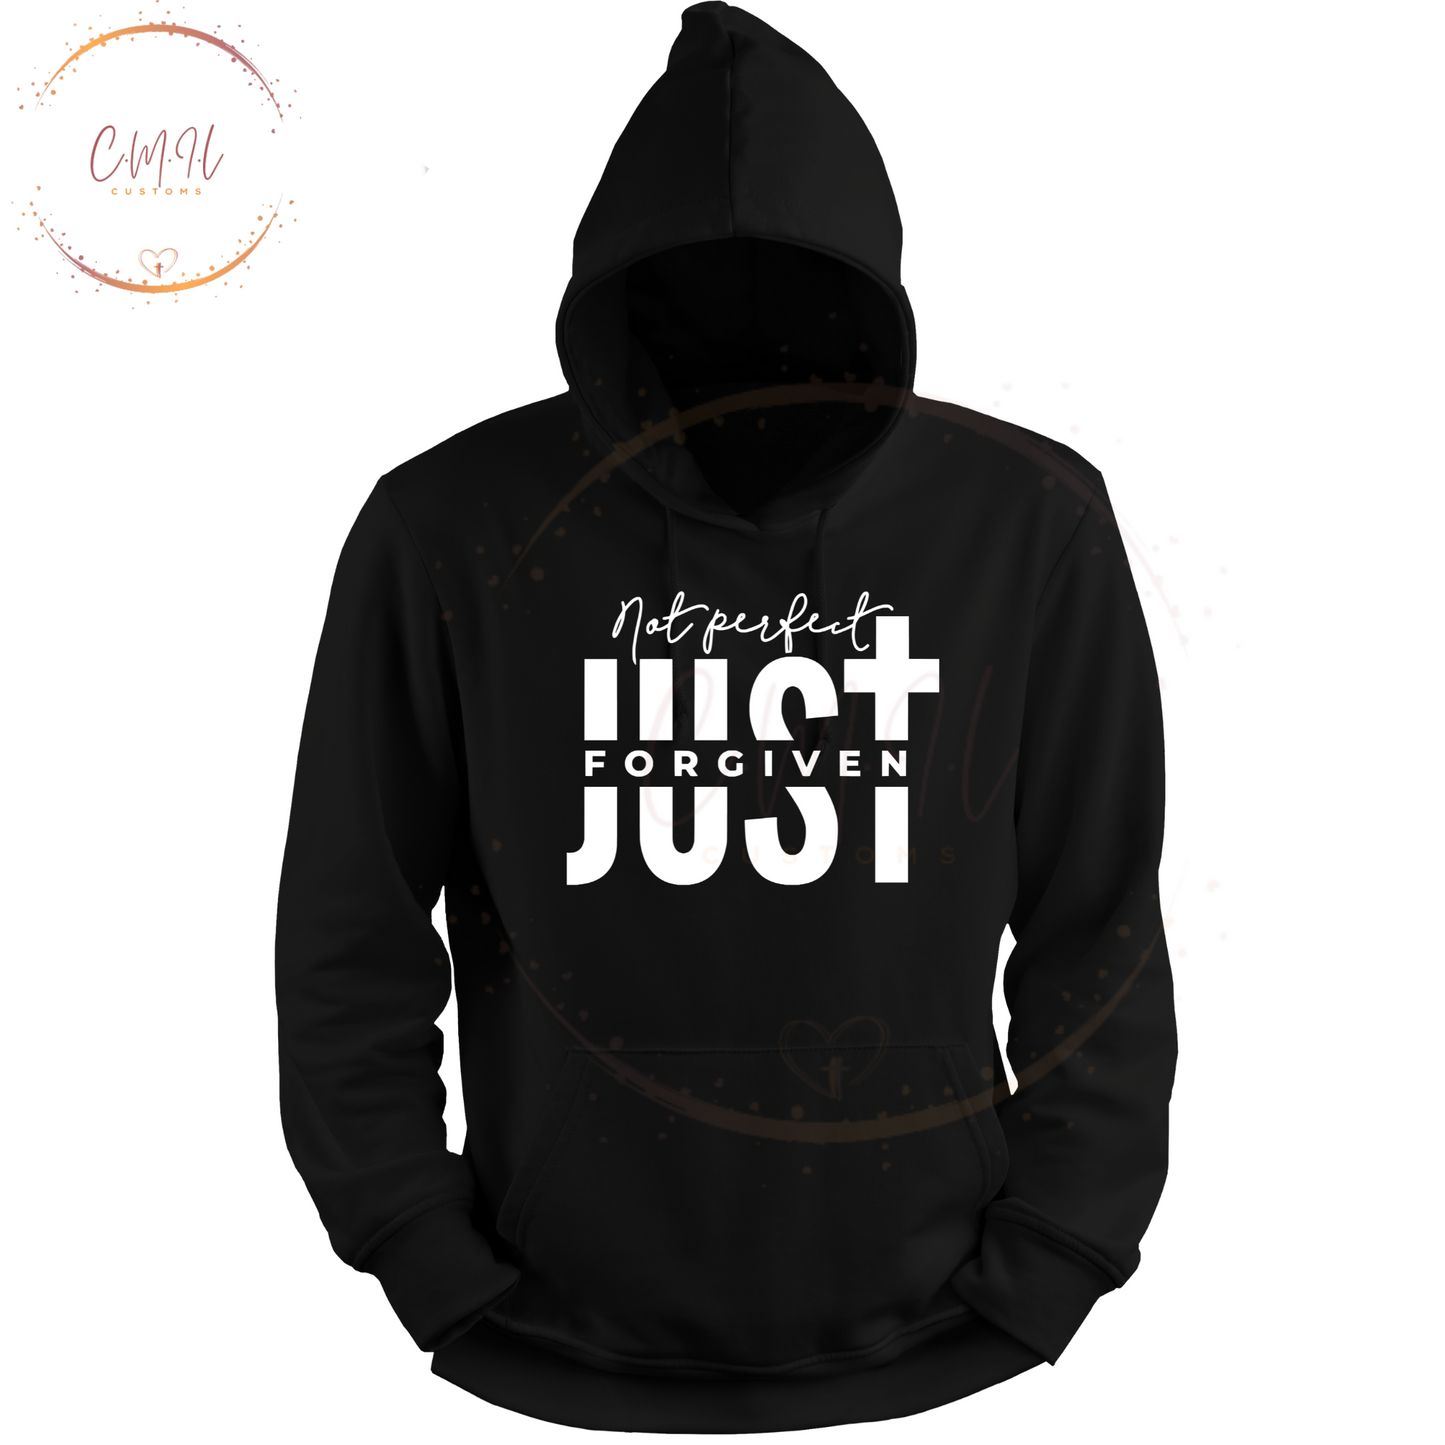 Not Perfect Just Forgiven Hoodie